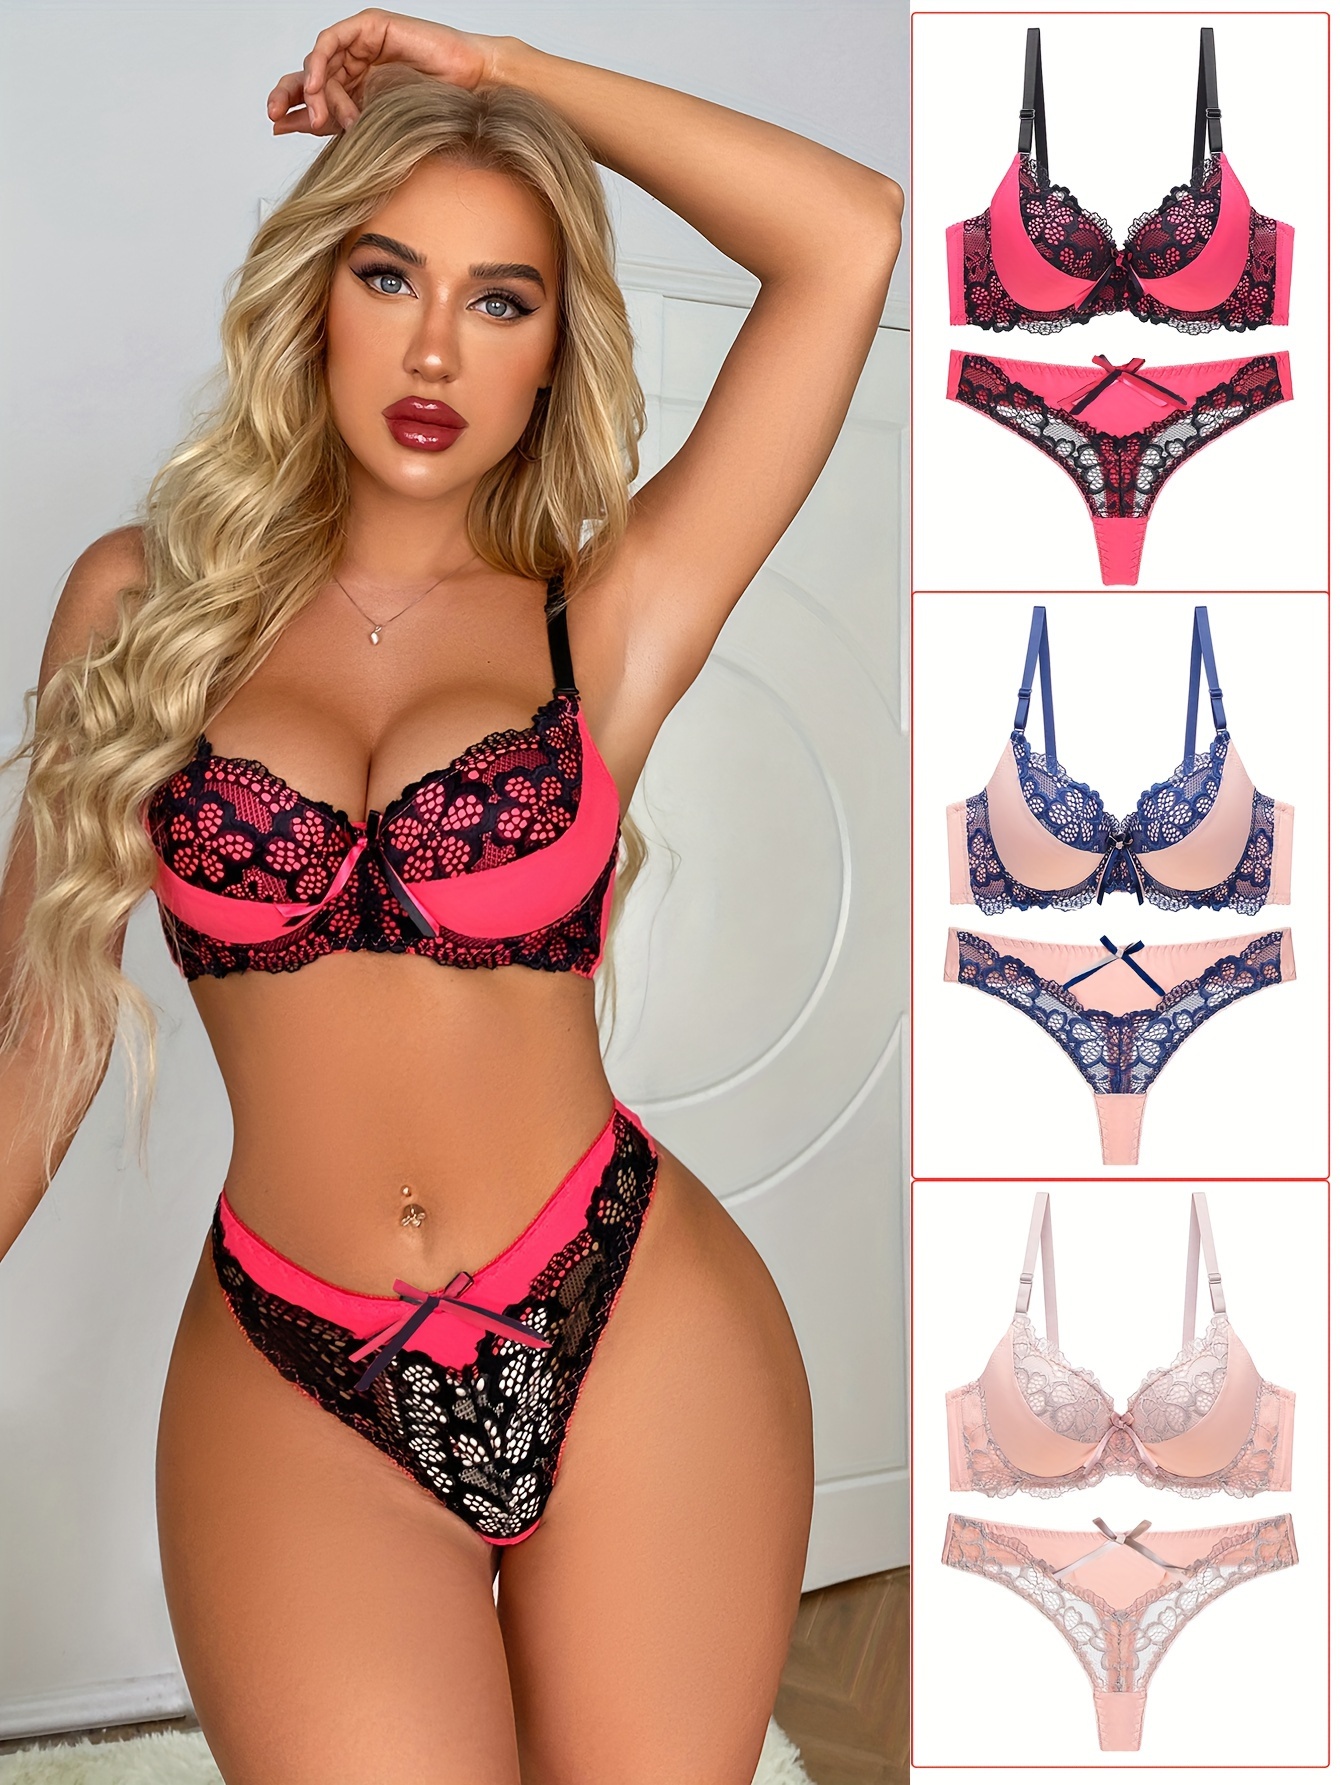 Sujetador Push Up Bras And Panty Sets For Women Sexy Intimates Bra